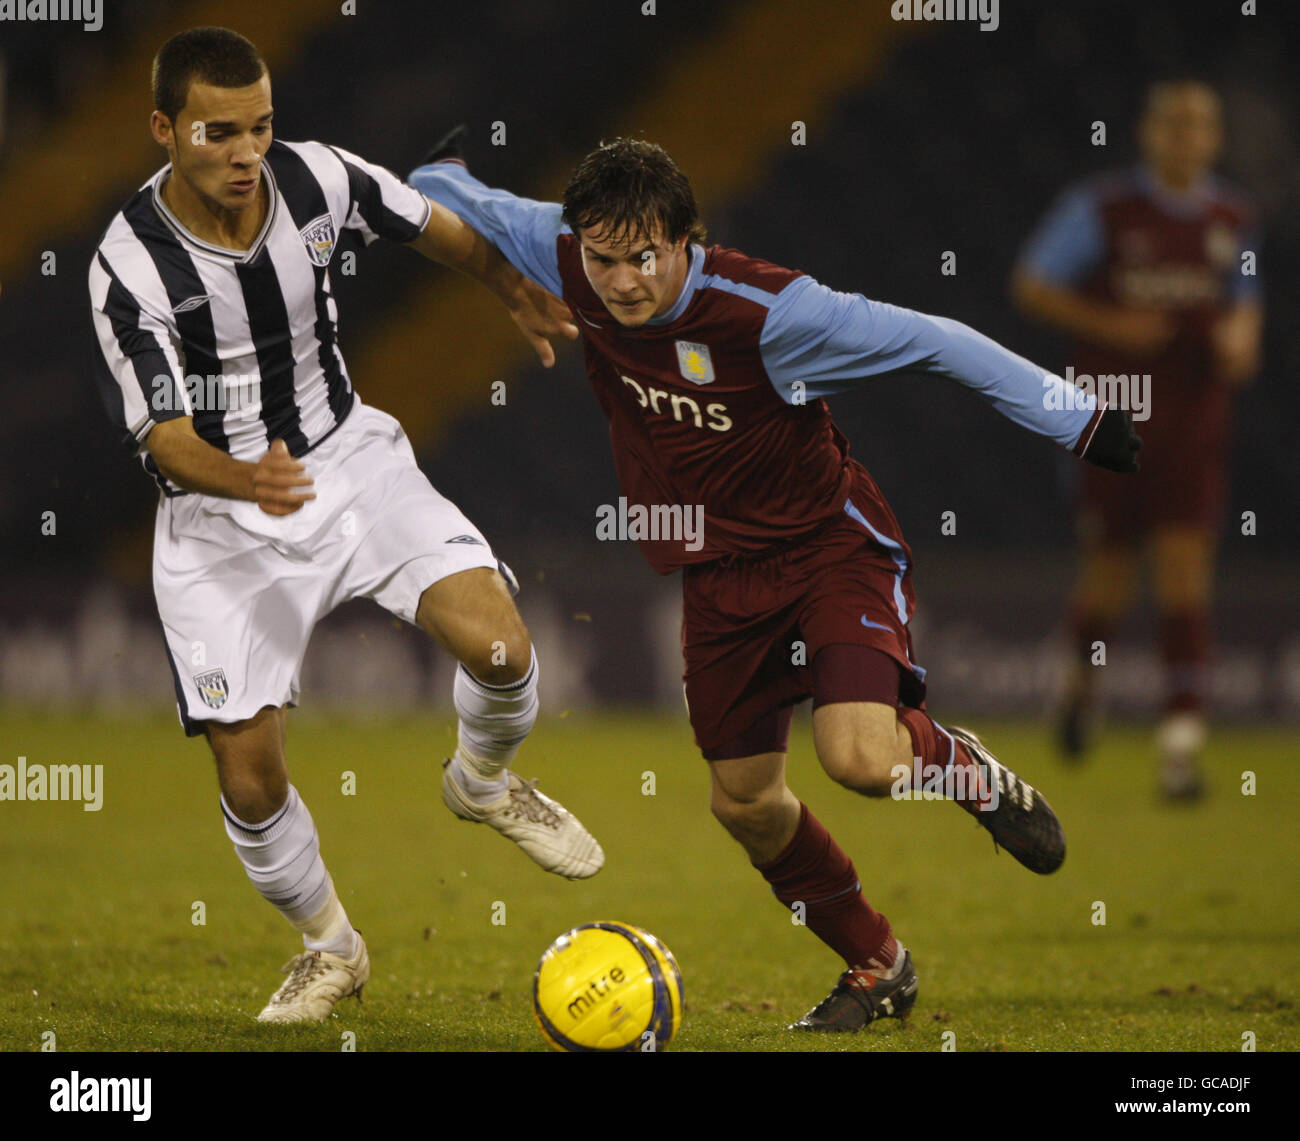 Aston Villa's Ryan Simmonds (right) tussles for the ball with West Bromwich Albion's Ashley Malcolm (left) during the FA Youth Cup 4th Round game. Stock Photo